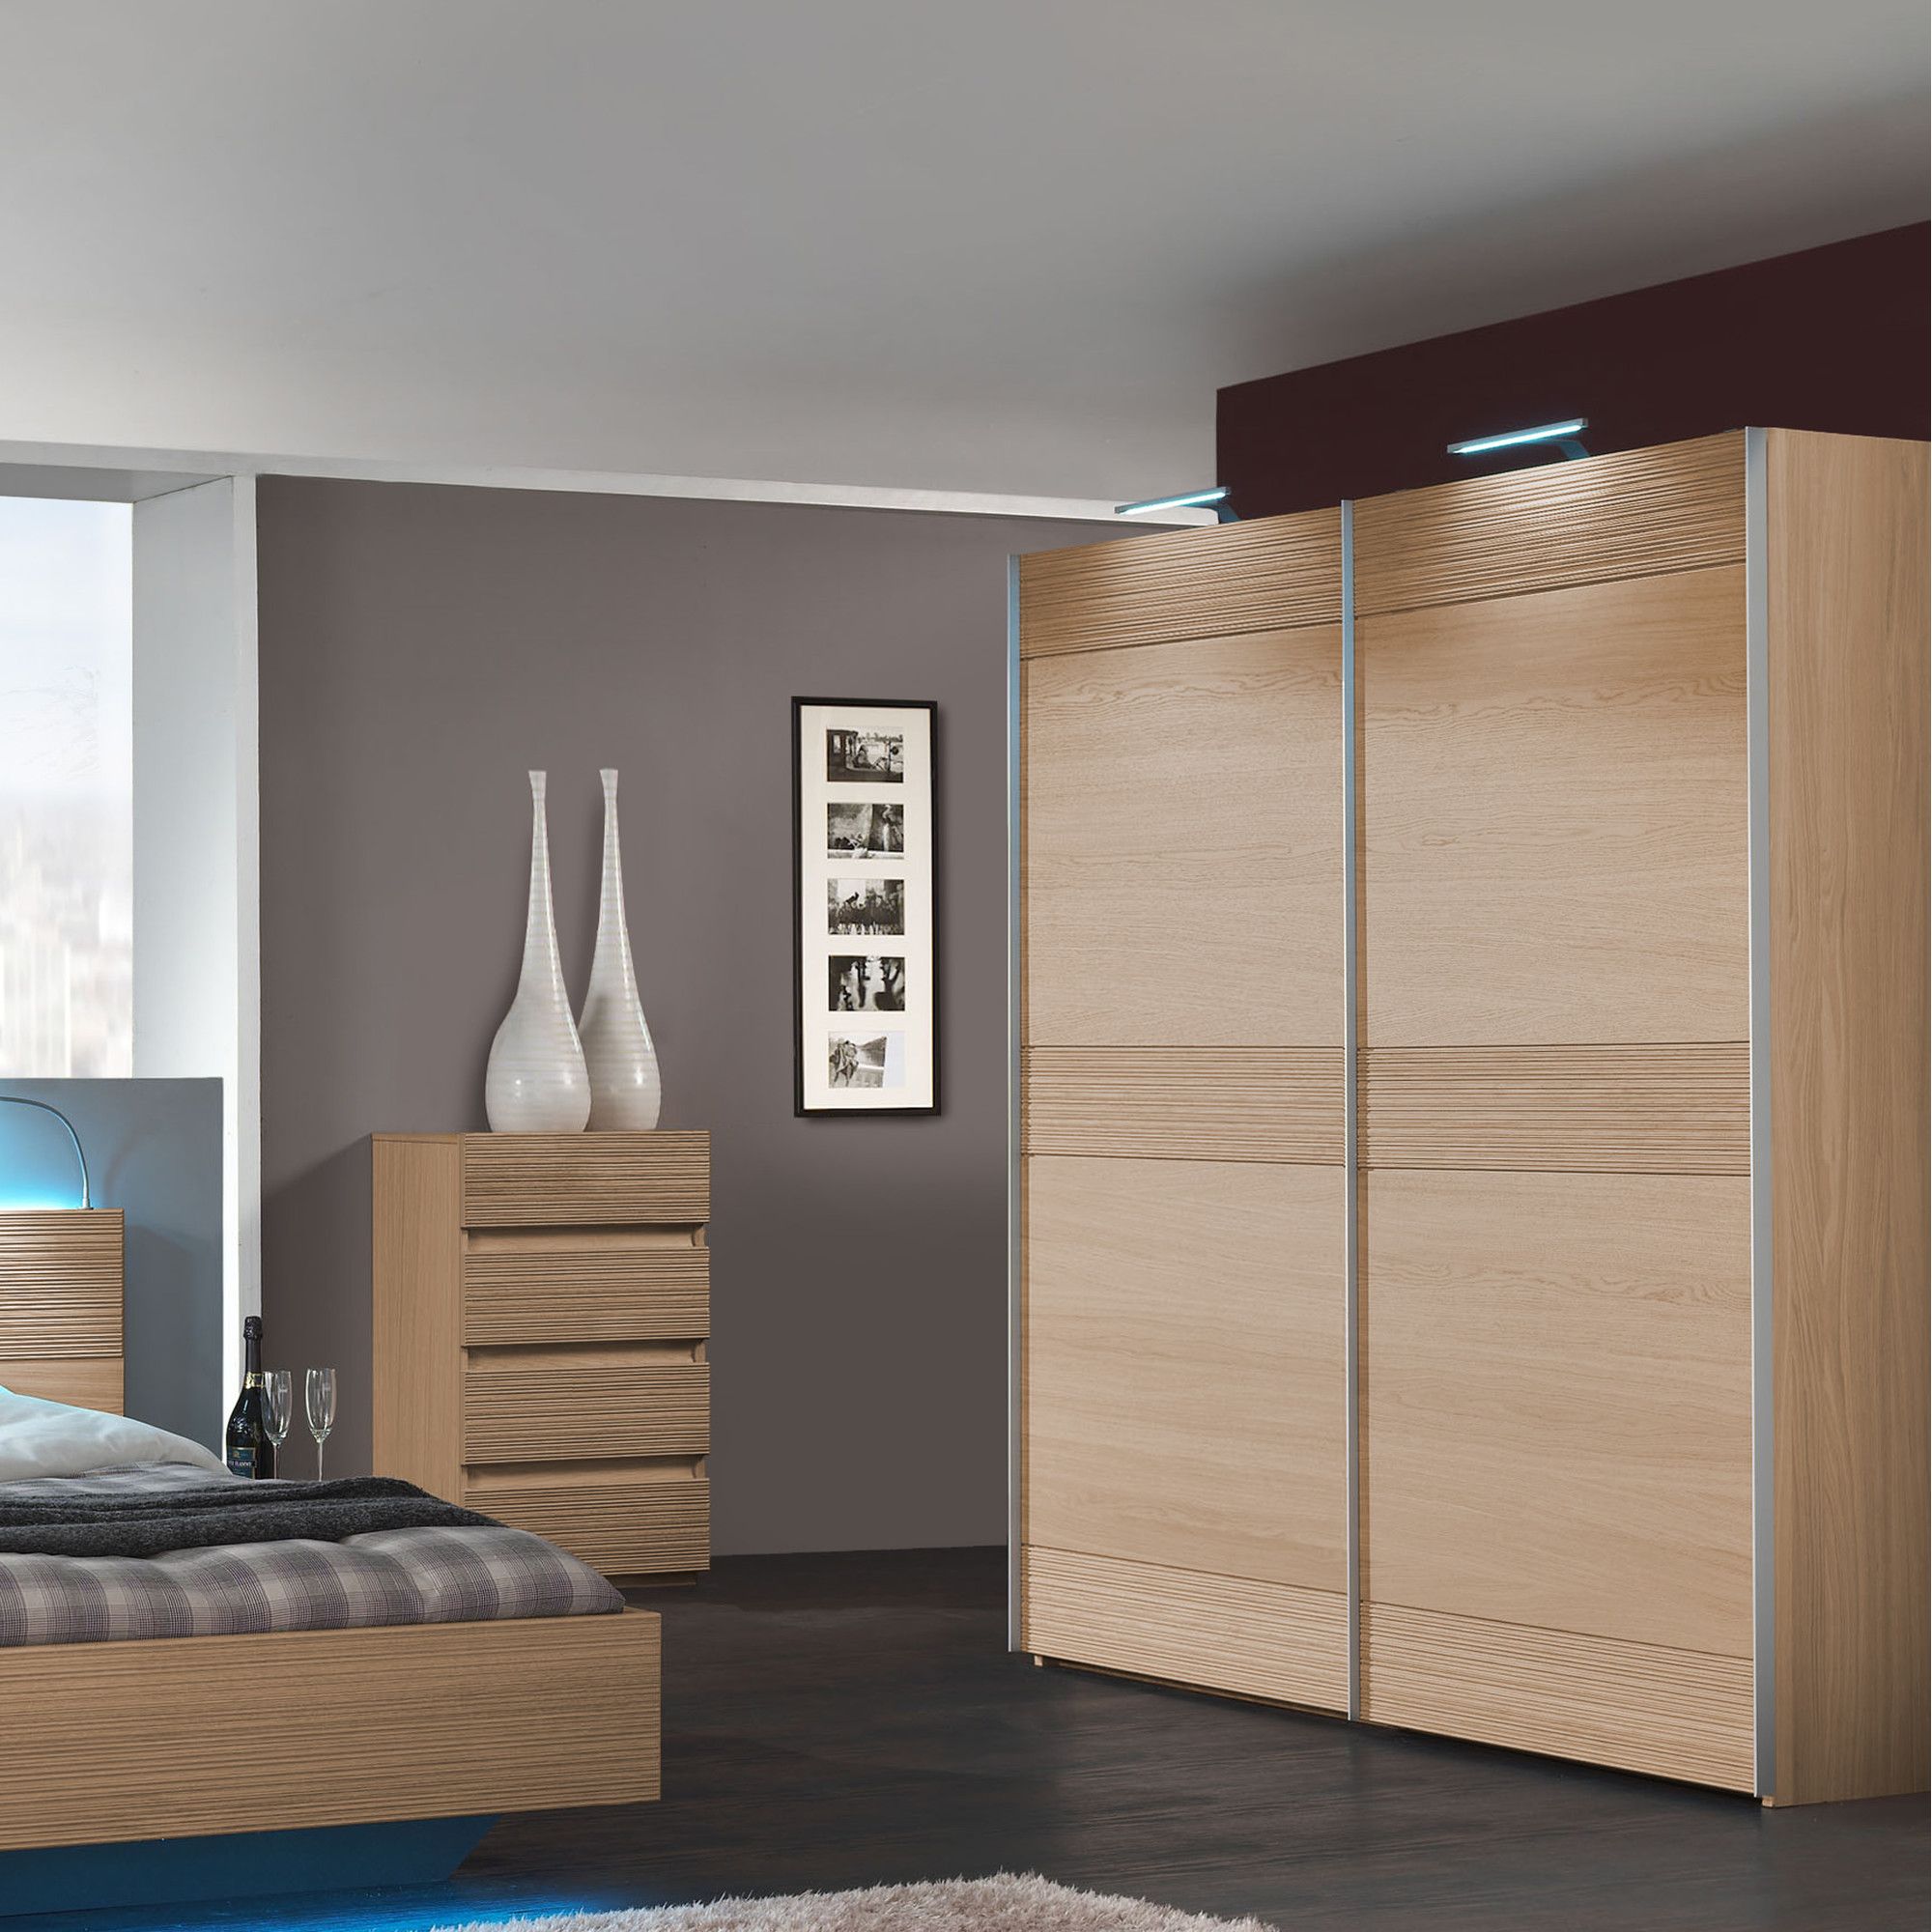 Sleepline Diva Wardrobe with 4 Shelves - 229cm - Without Mirror - Mat Lacquered at Tesco Direct